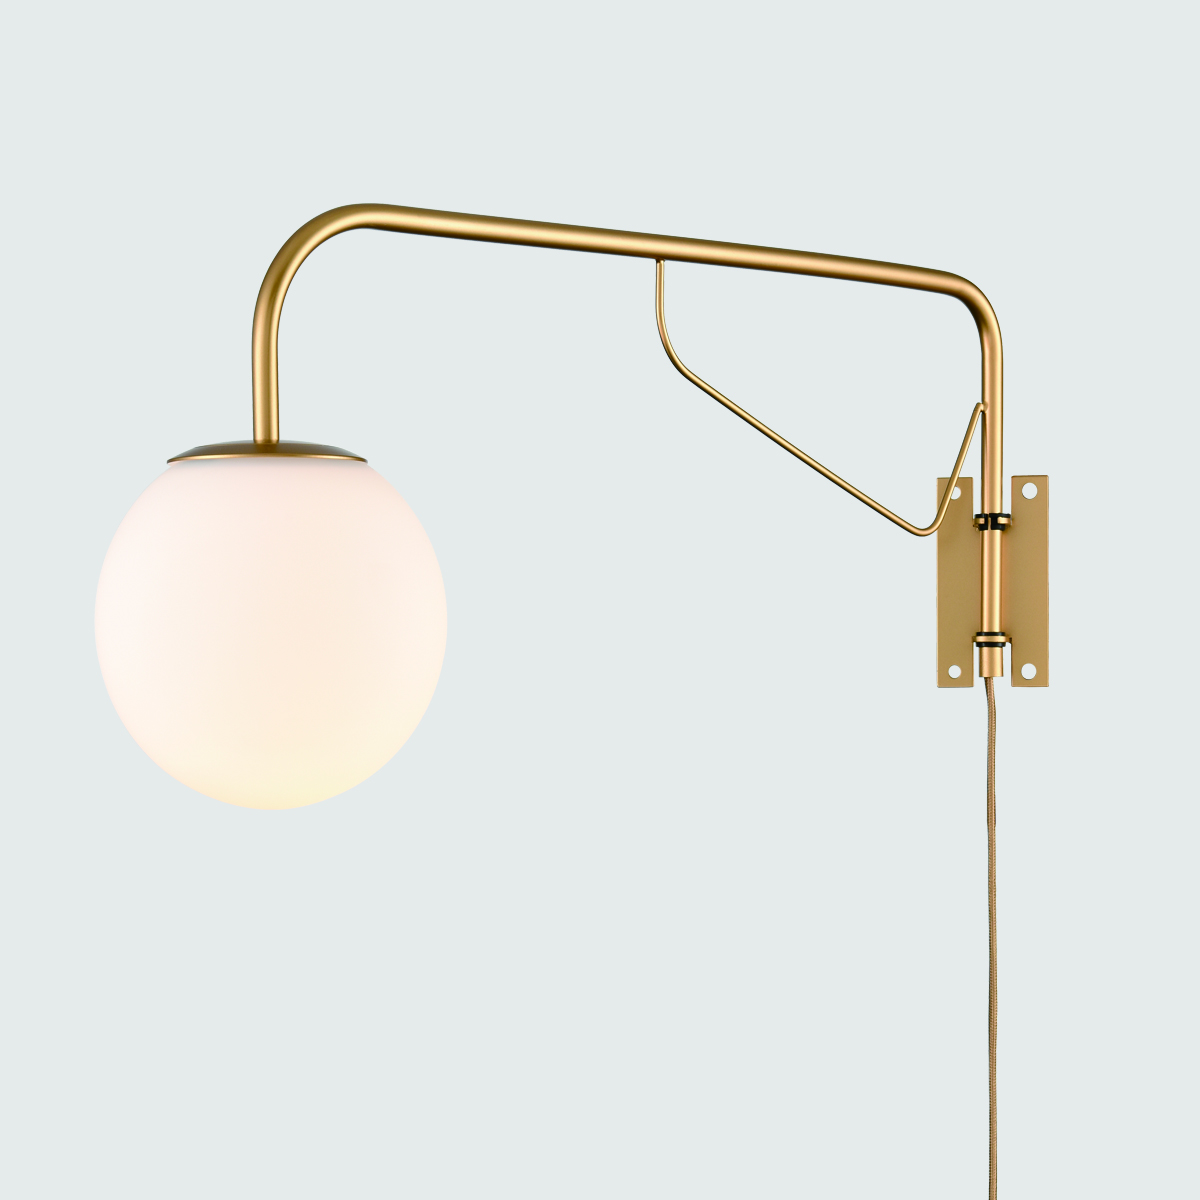 Modern Gold Plug in Swing Arm Wall Lamp with On/Off Switch Wall Sconce Milky Globe Glass Shade for Bedroom